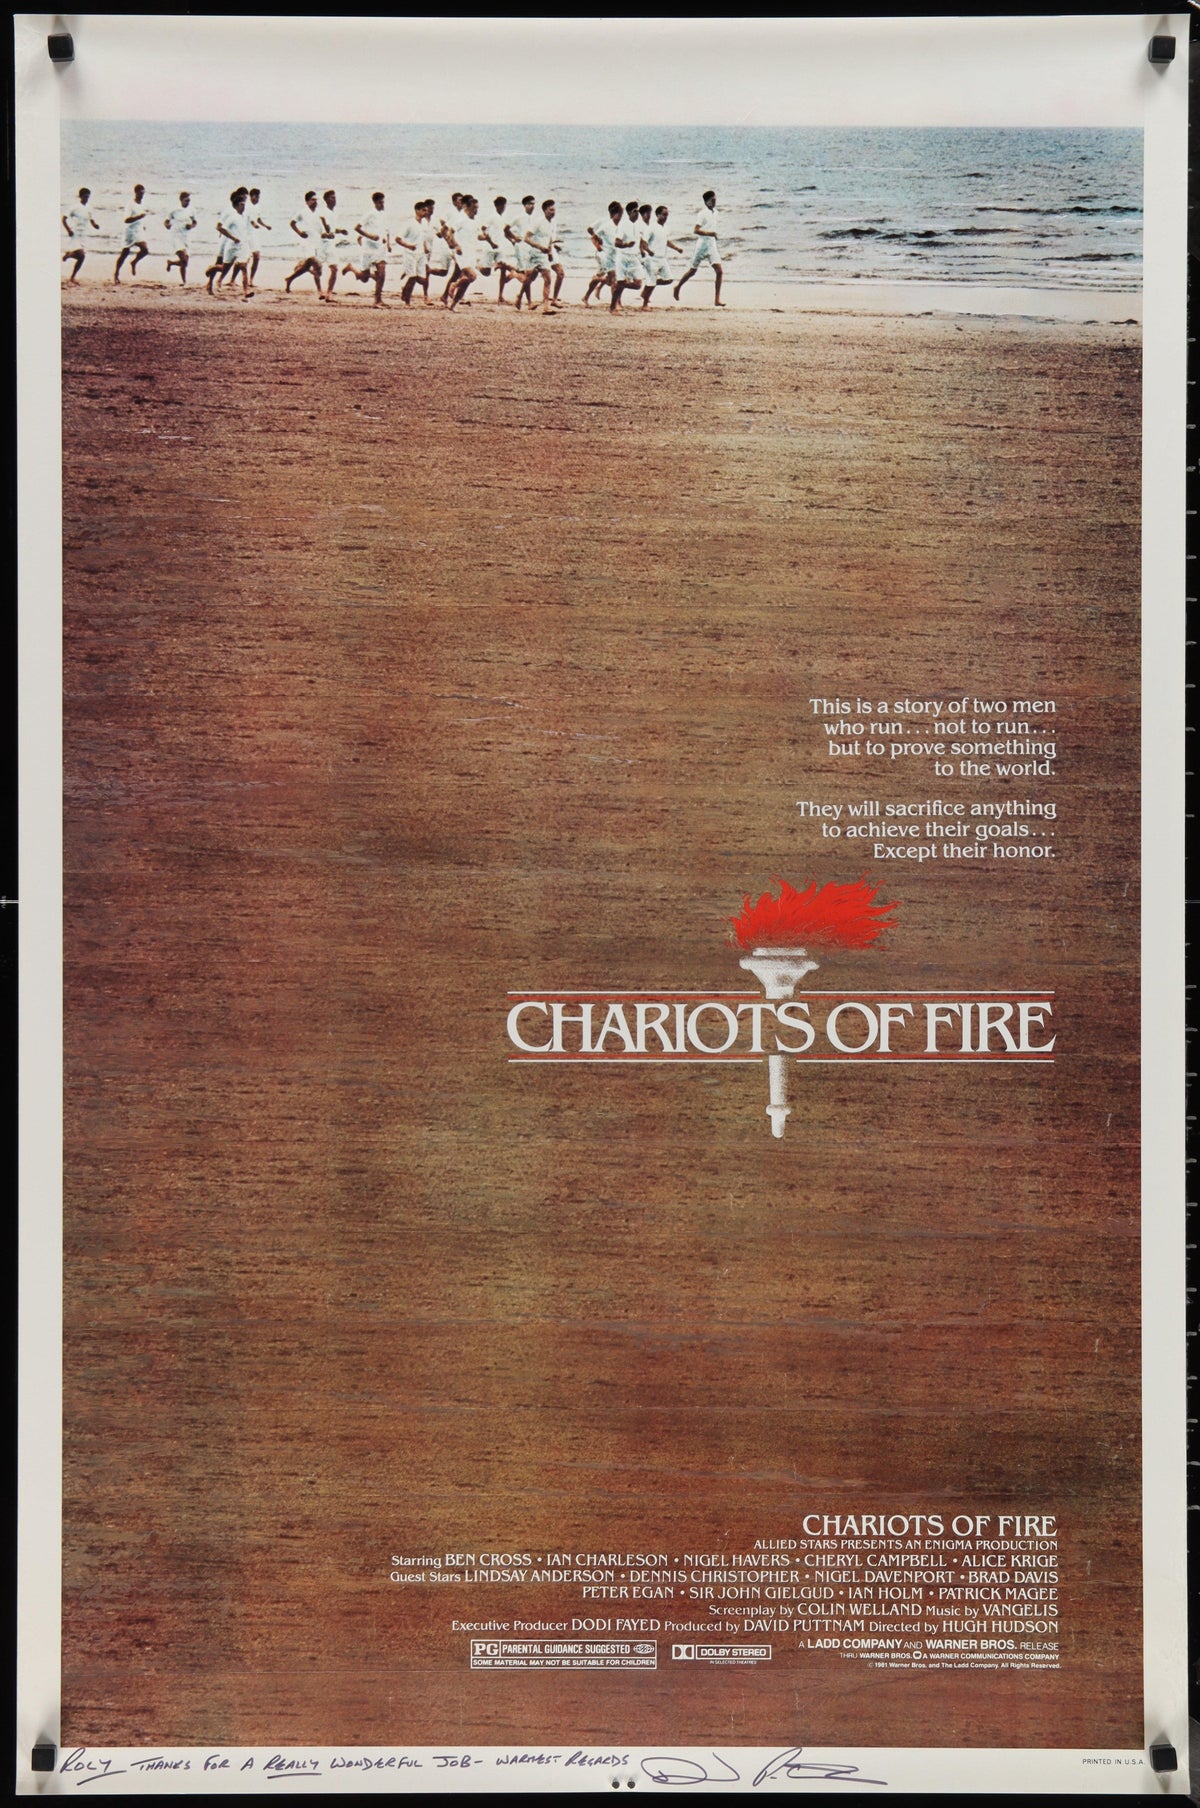 Chariots of Fire 1 Sheet (27x41) Original Vintage Movie Poster